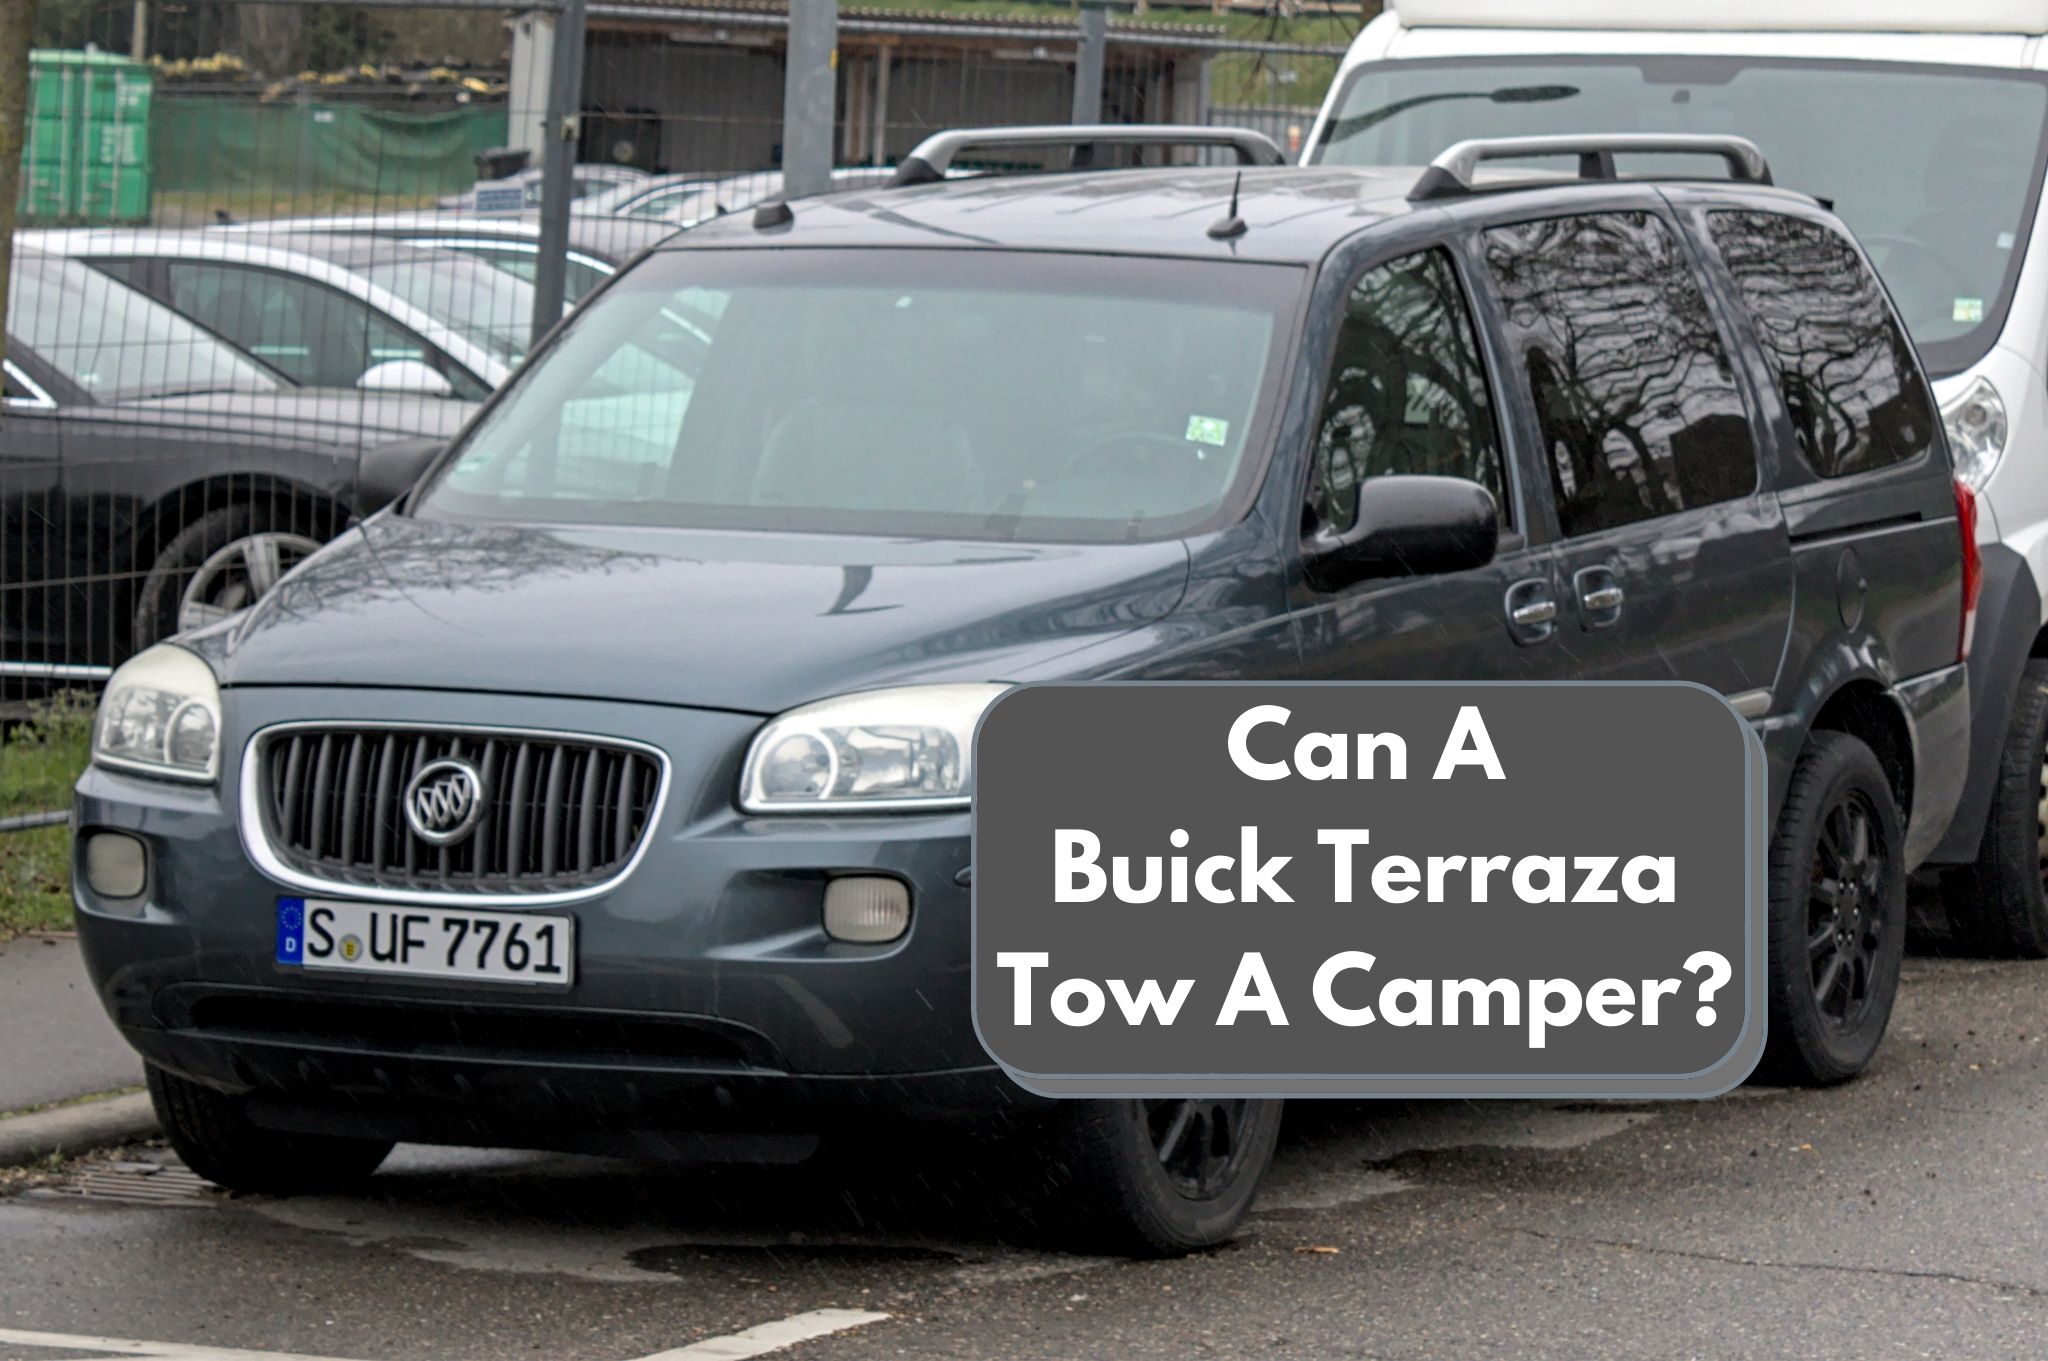 Can A Buick Terraza Tow A Camper